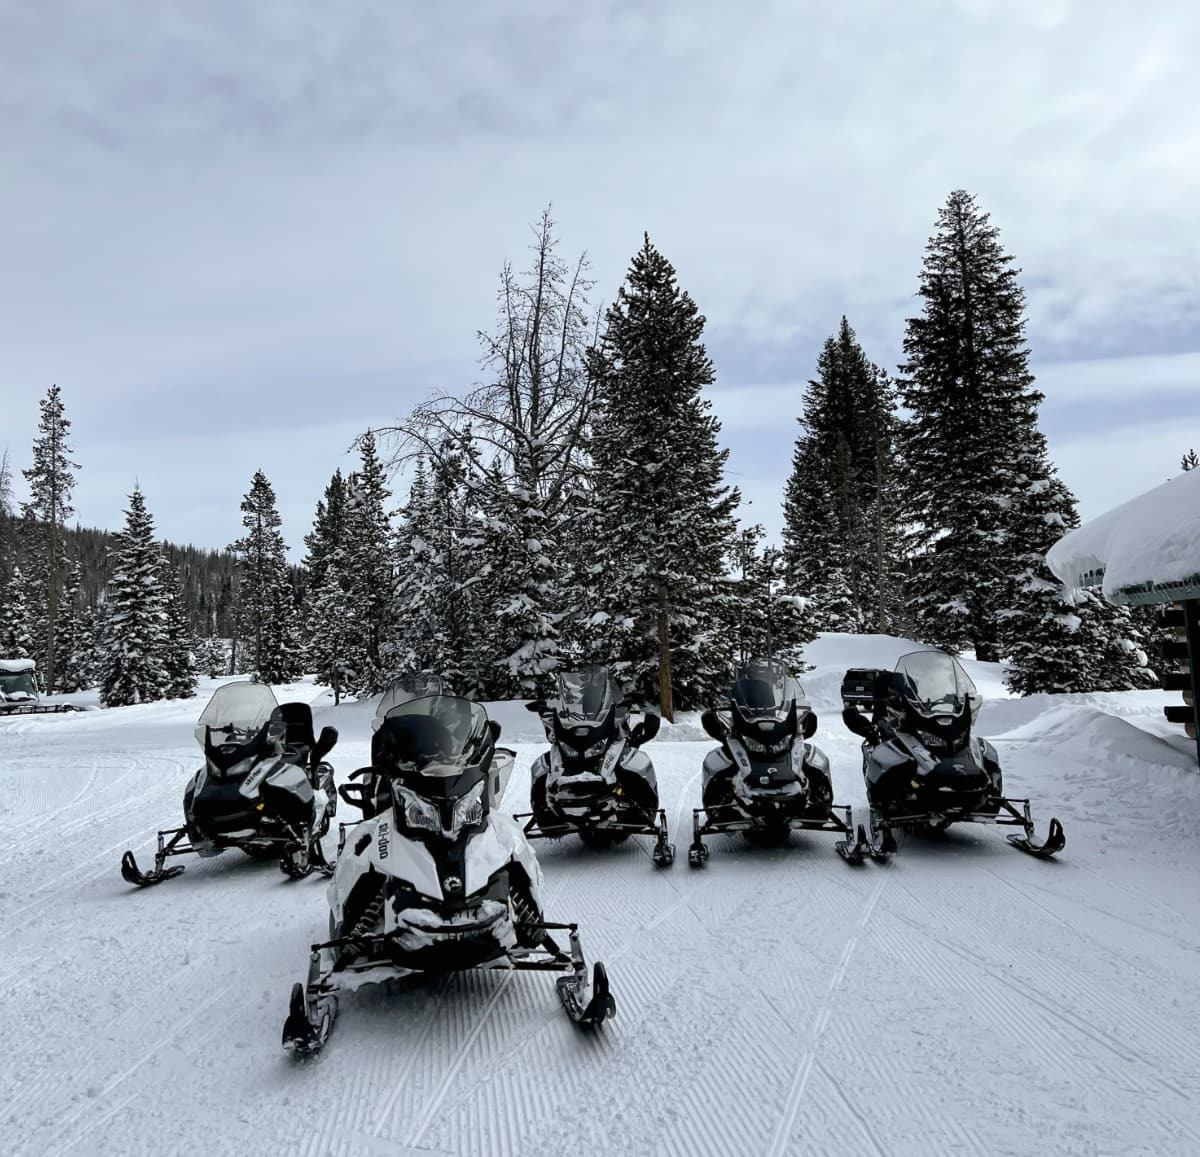 snow mobiles ready to ride in steamboat springs, colorado.